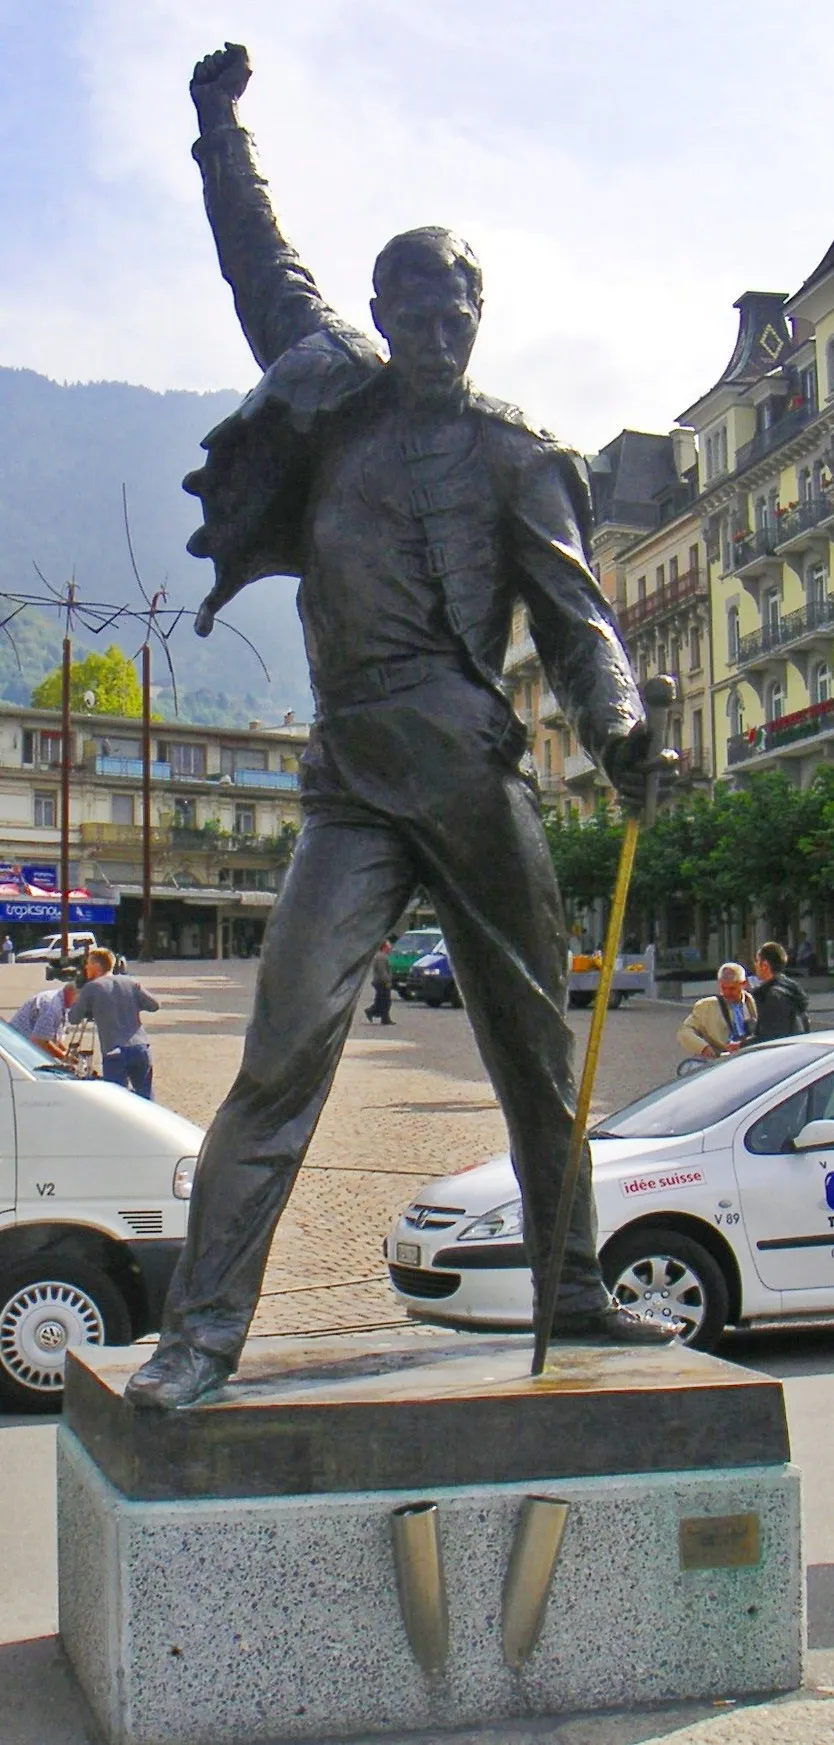 Photo showing: Freddie Mercury statue in Montreux, sculpted by Irena Sedlecká in 1996